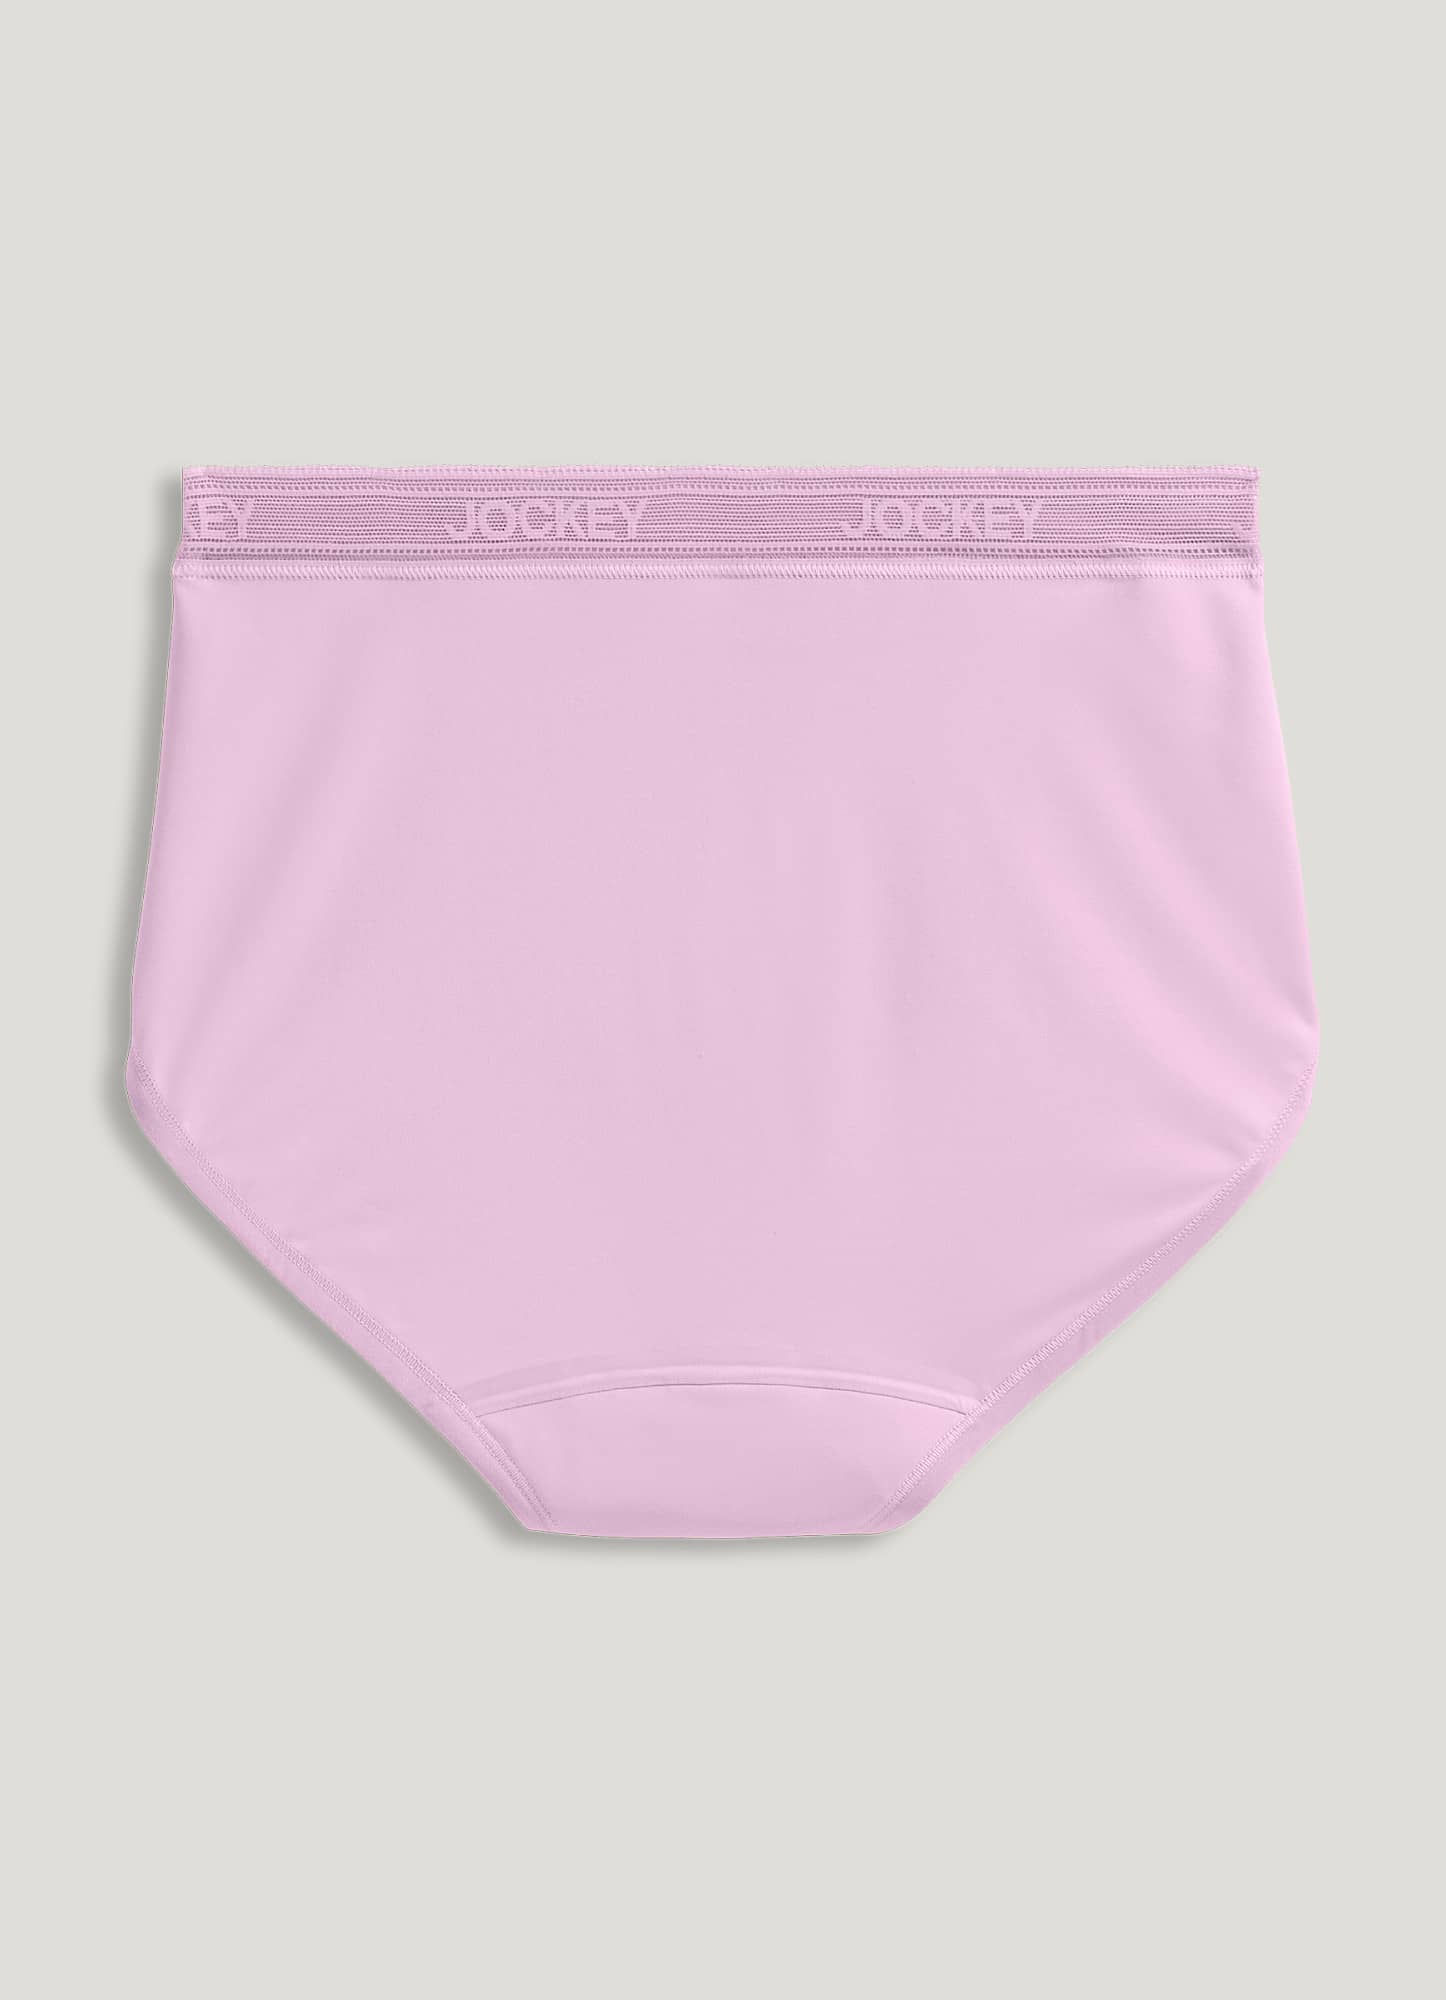 Jockey Women's Worry Free Cotton Briefs for Bladder Leaks and